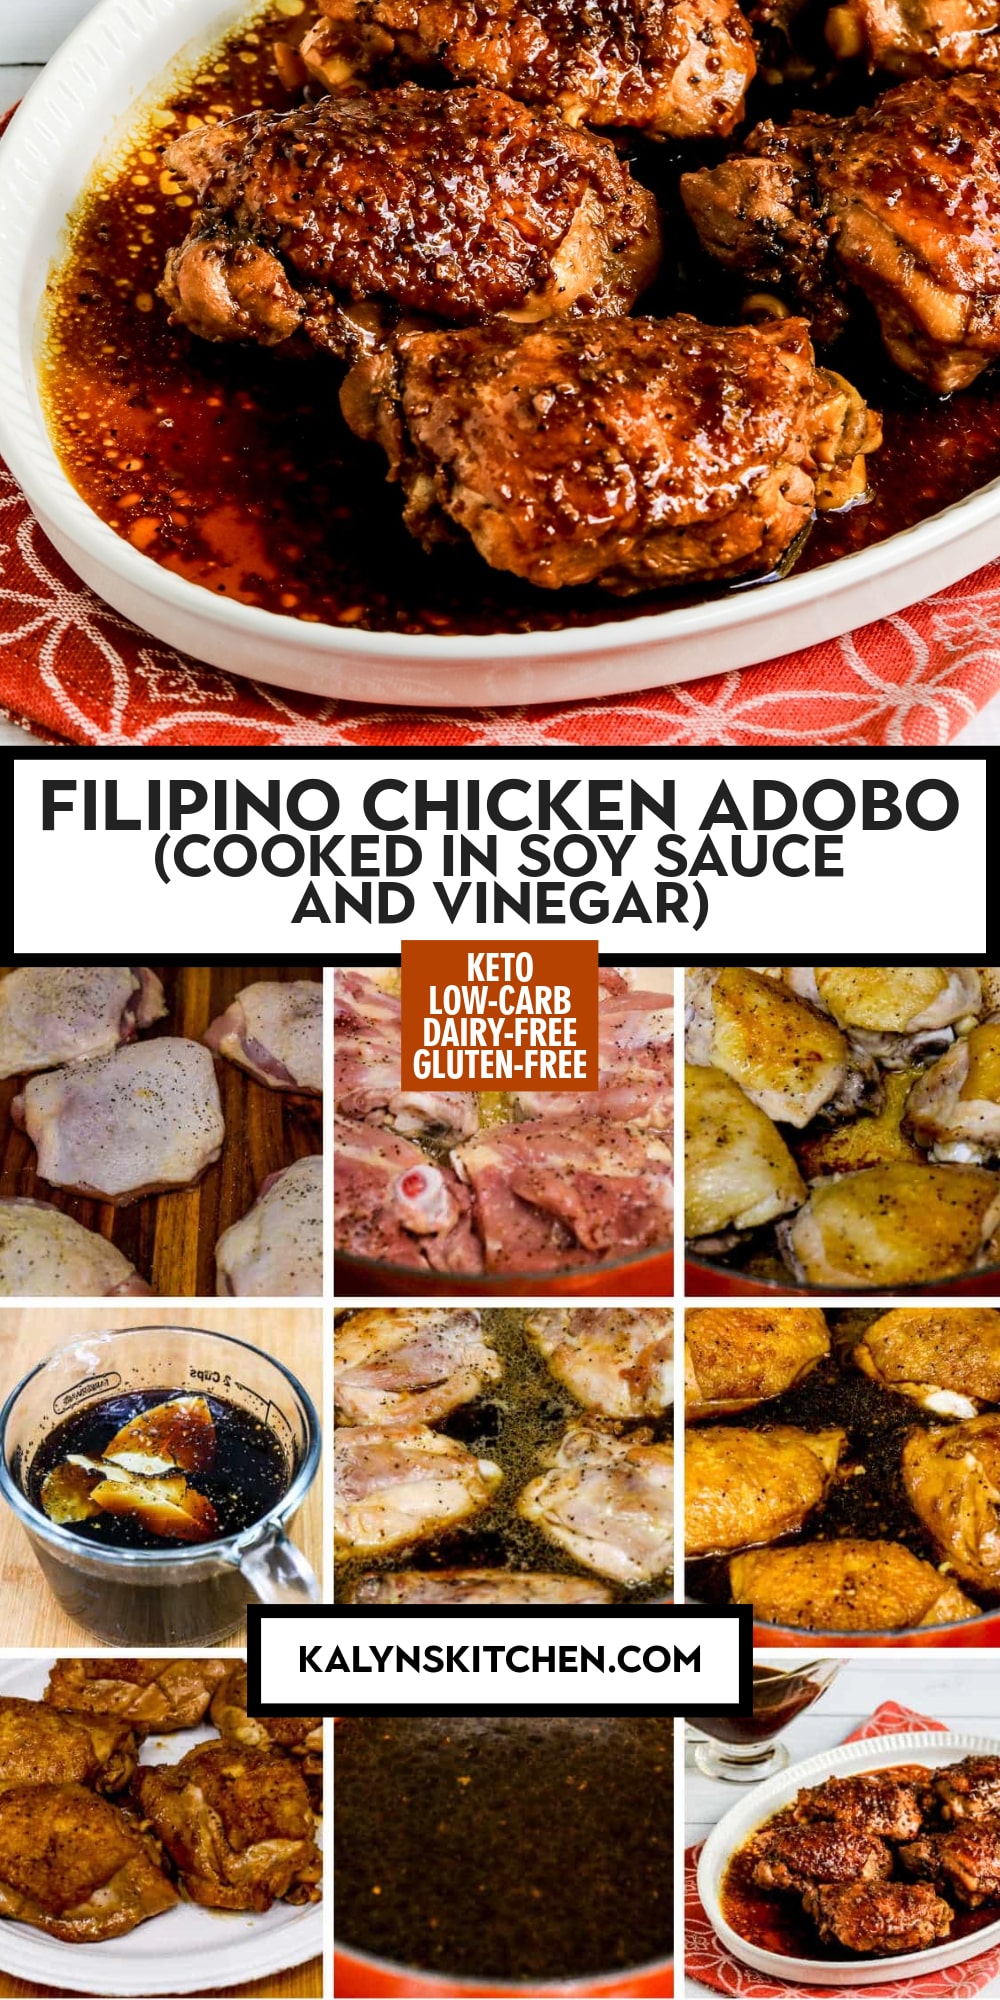 Pinterest image of Filipino Chicken Adobo (Cooked in Soy Sauce and Vinegar)